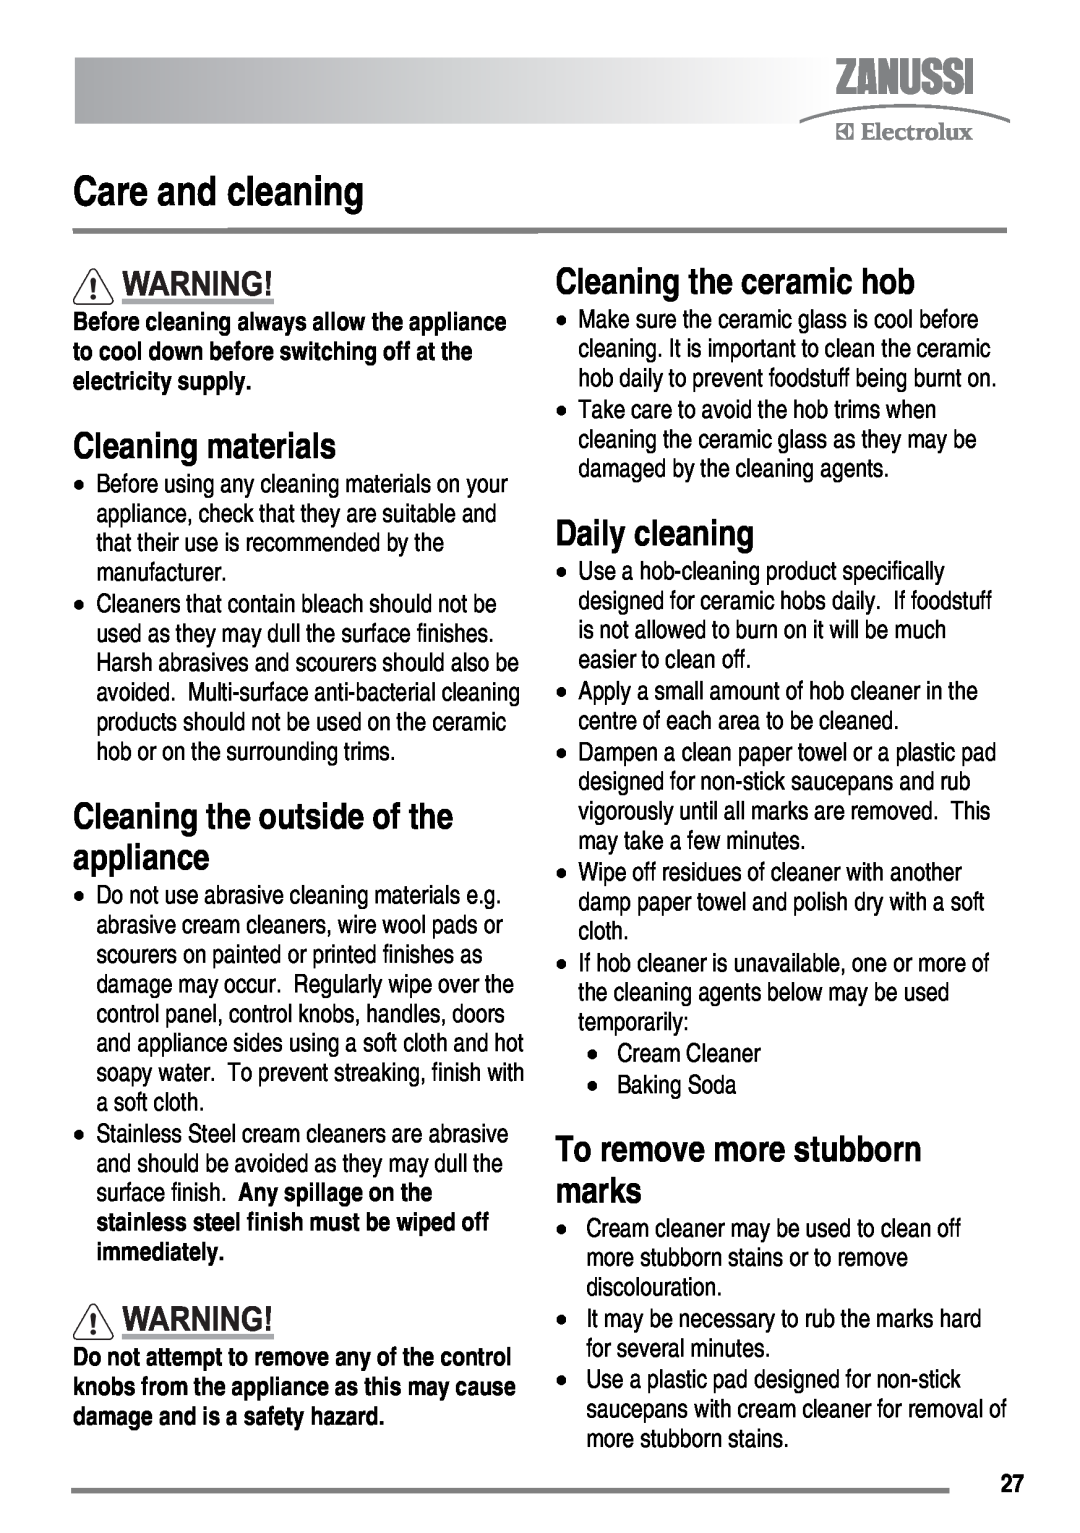 Zanussi ZKC5540 Care and cleaning, Cleaning materials, Cleaning the outside of the appliance, Cleaning the ceramic hob 